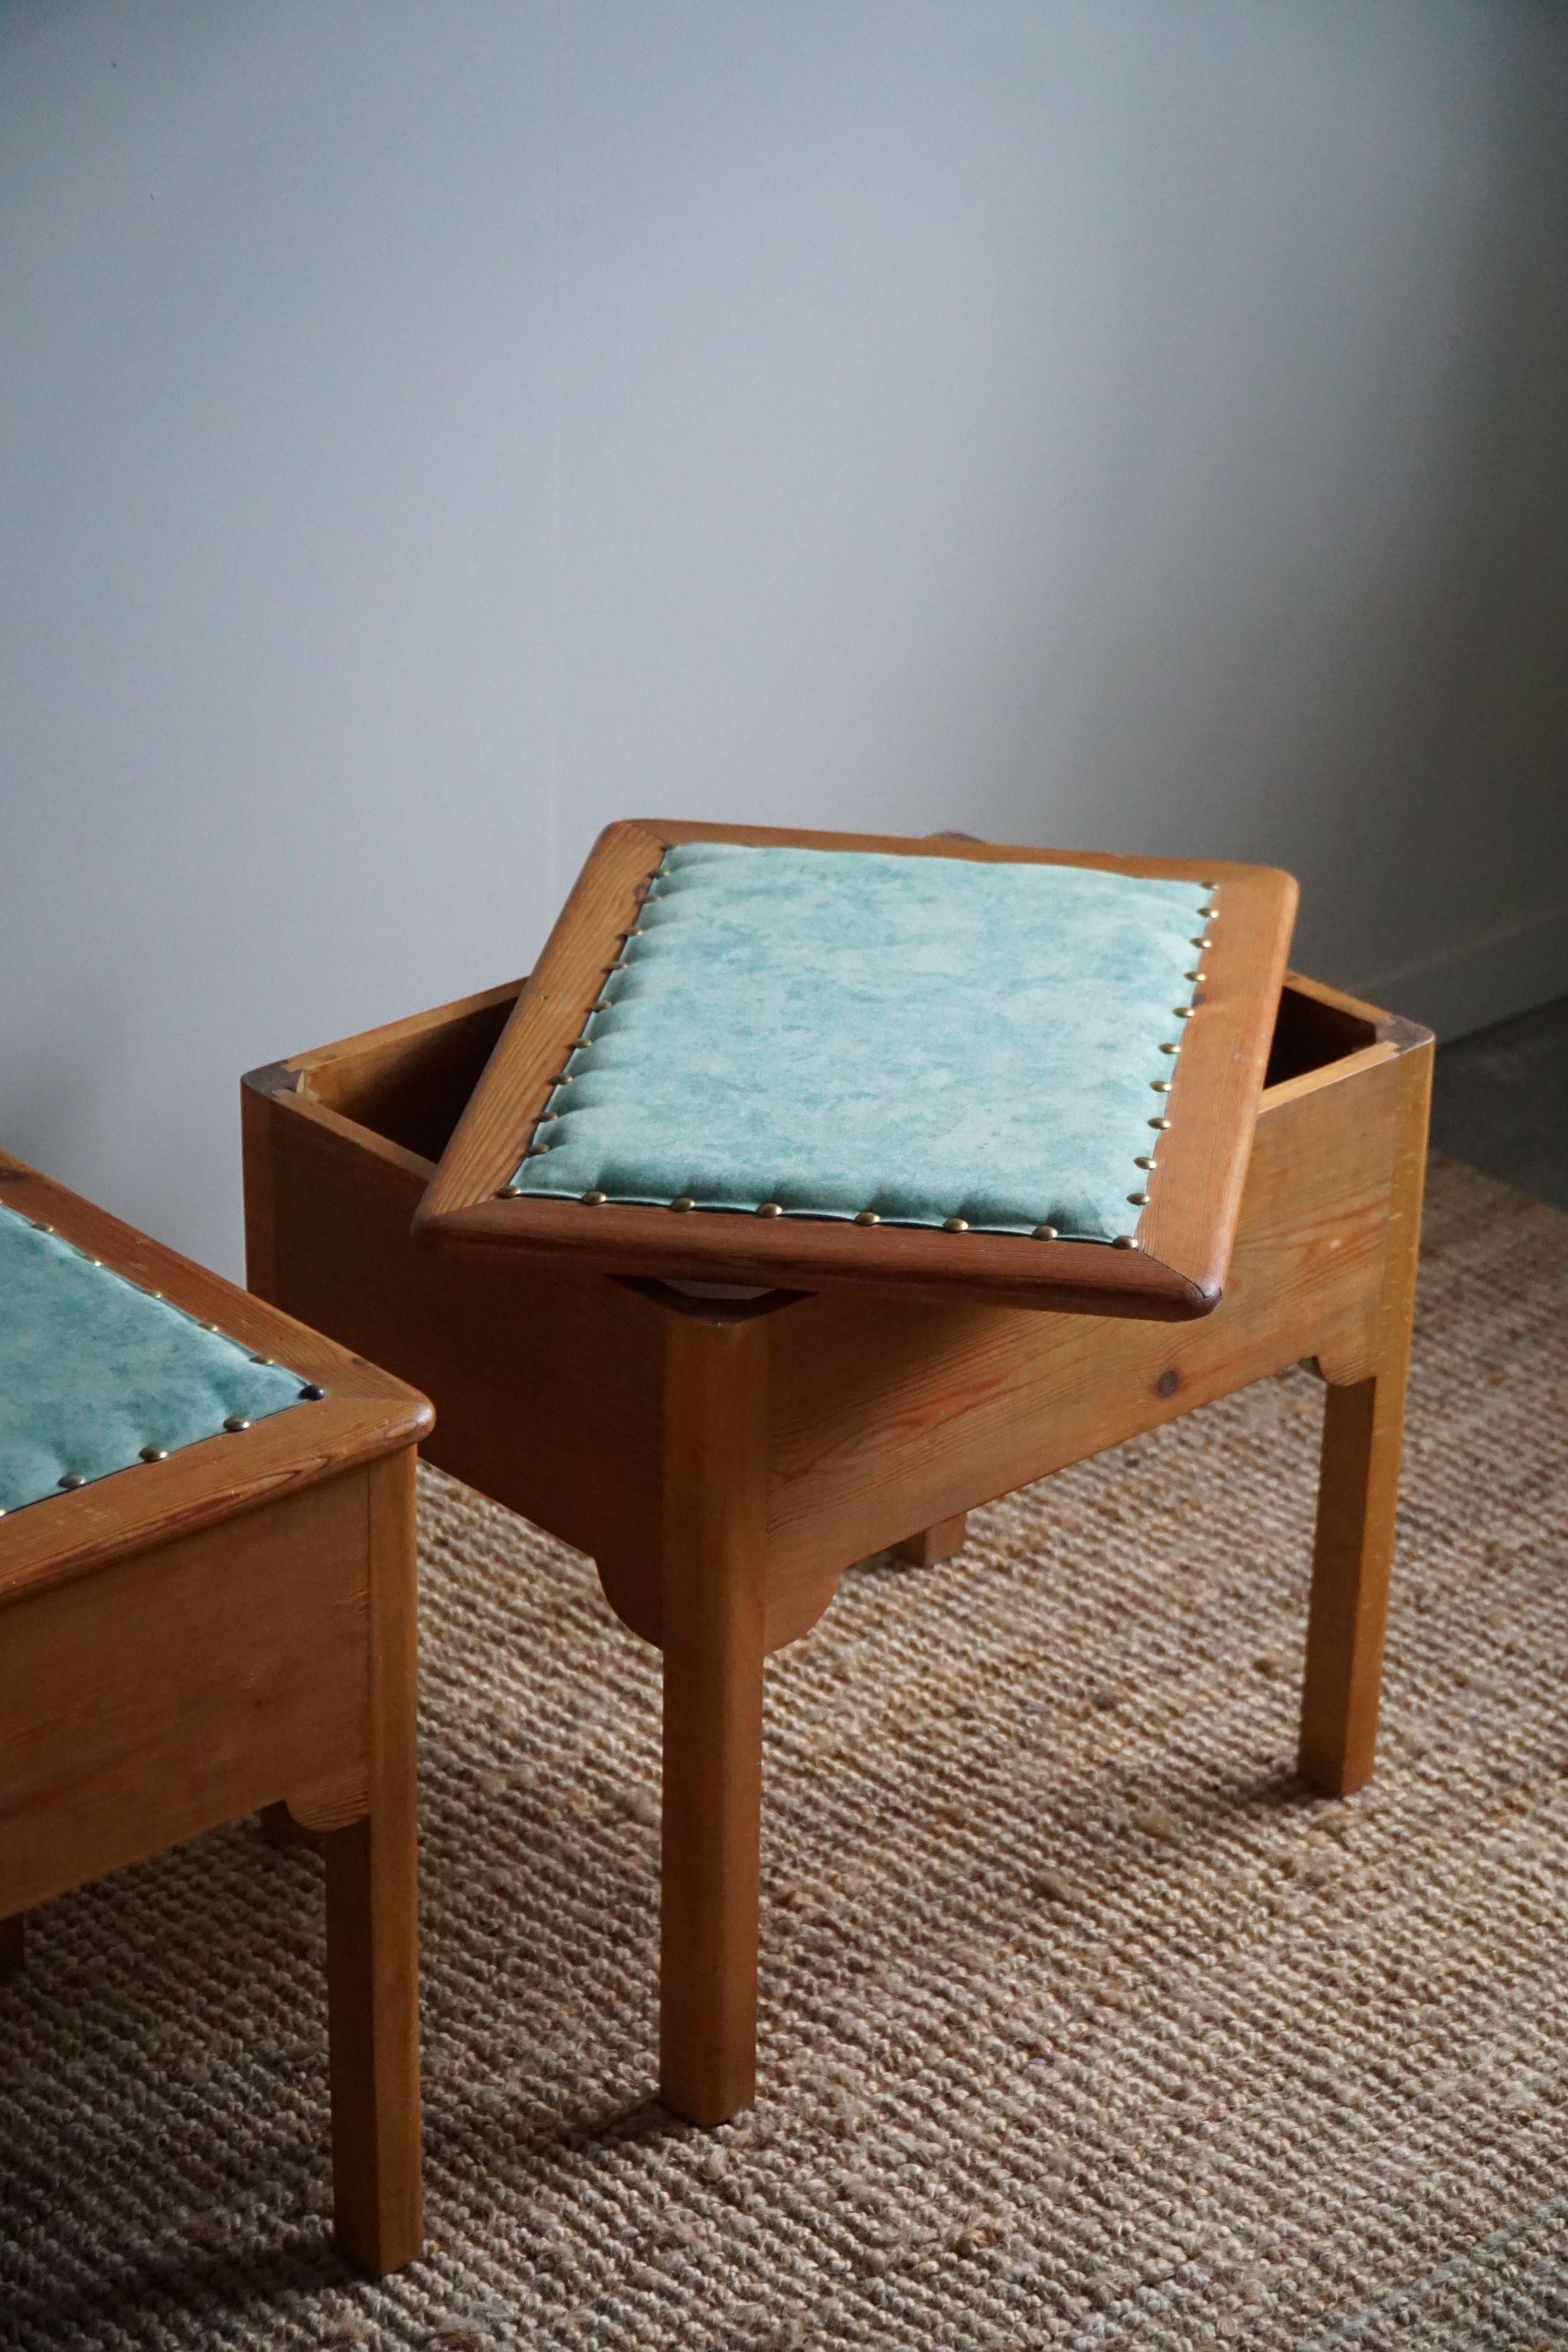 A Pair of Stools in Pine & Fabric with Storage, By a Swedish Cabinetmaker, 1950s For Sale 3